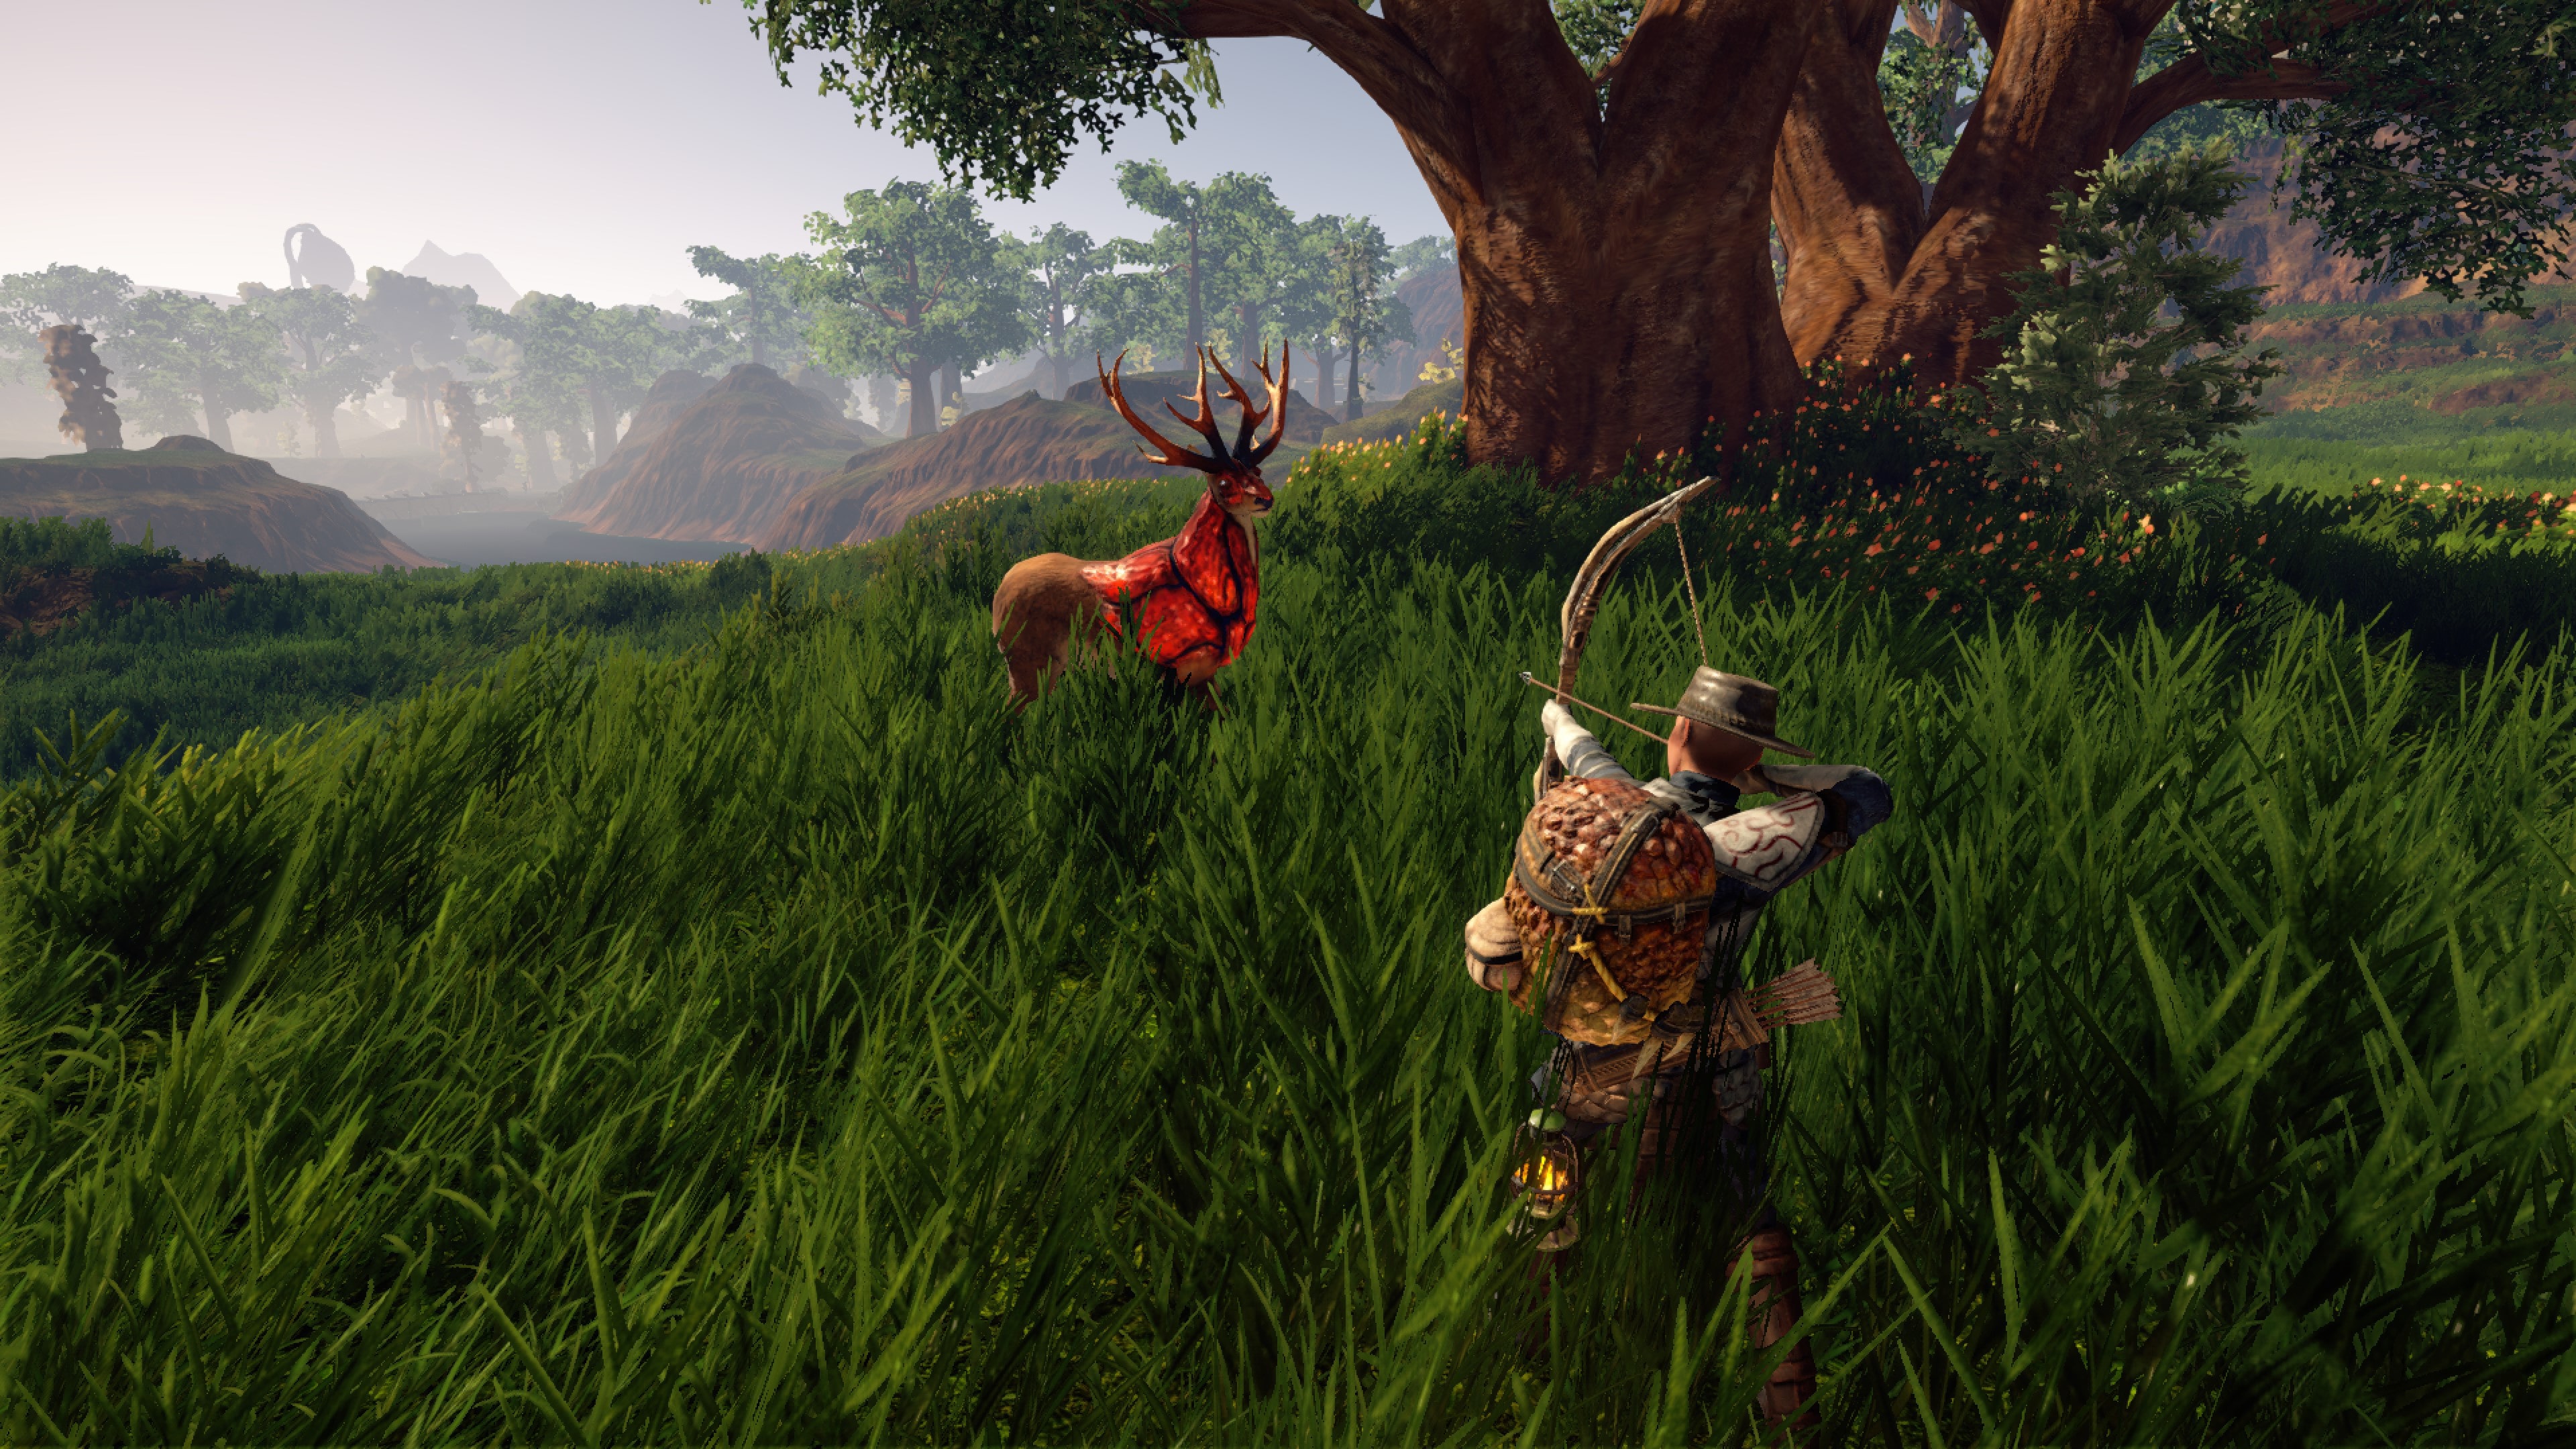 download the new for ios Outward Definitive Edition